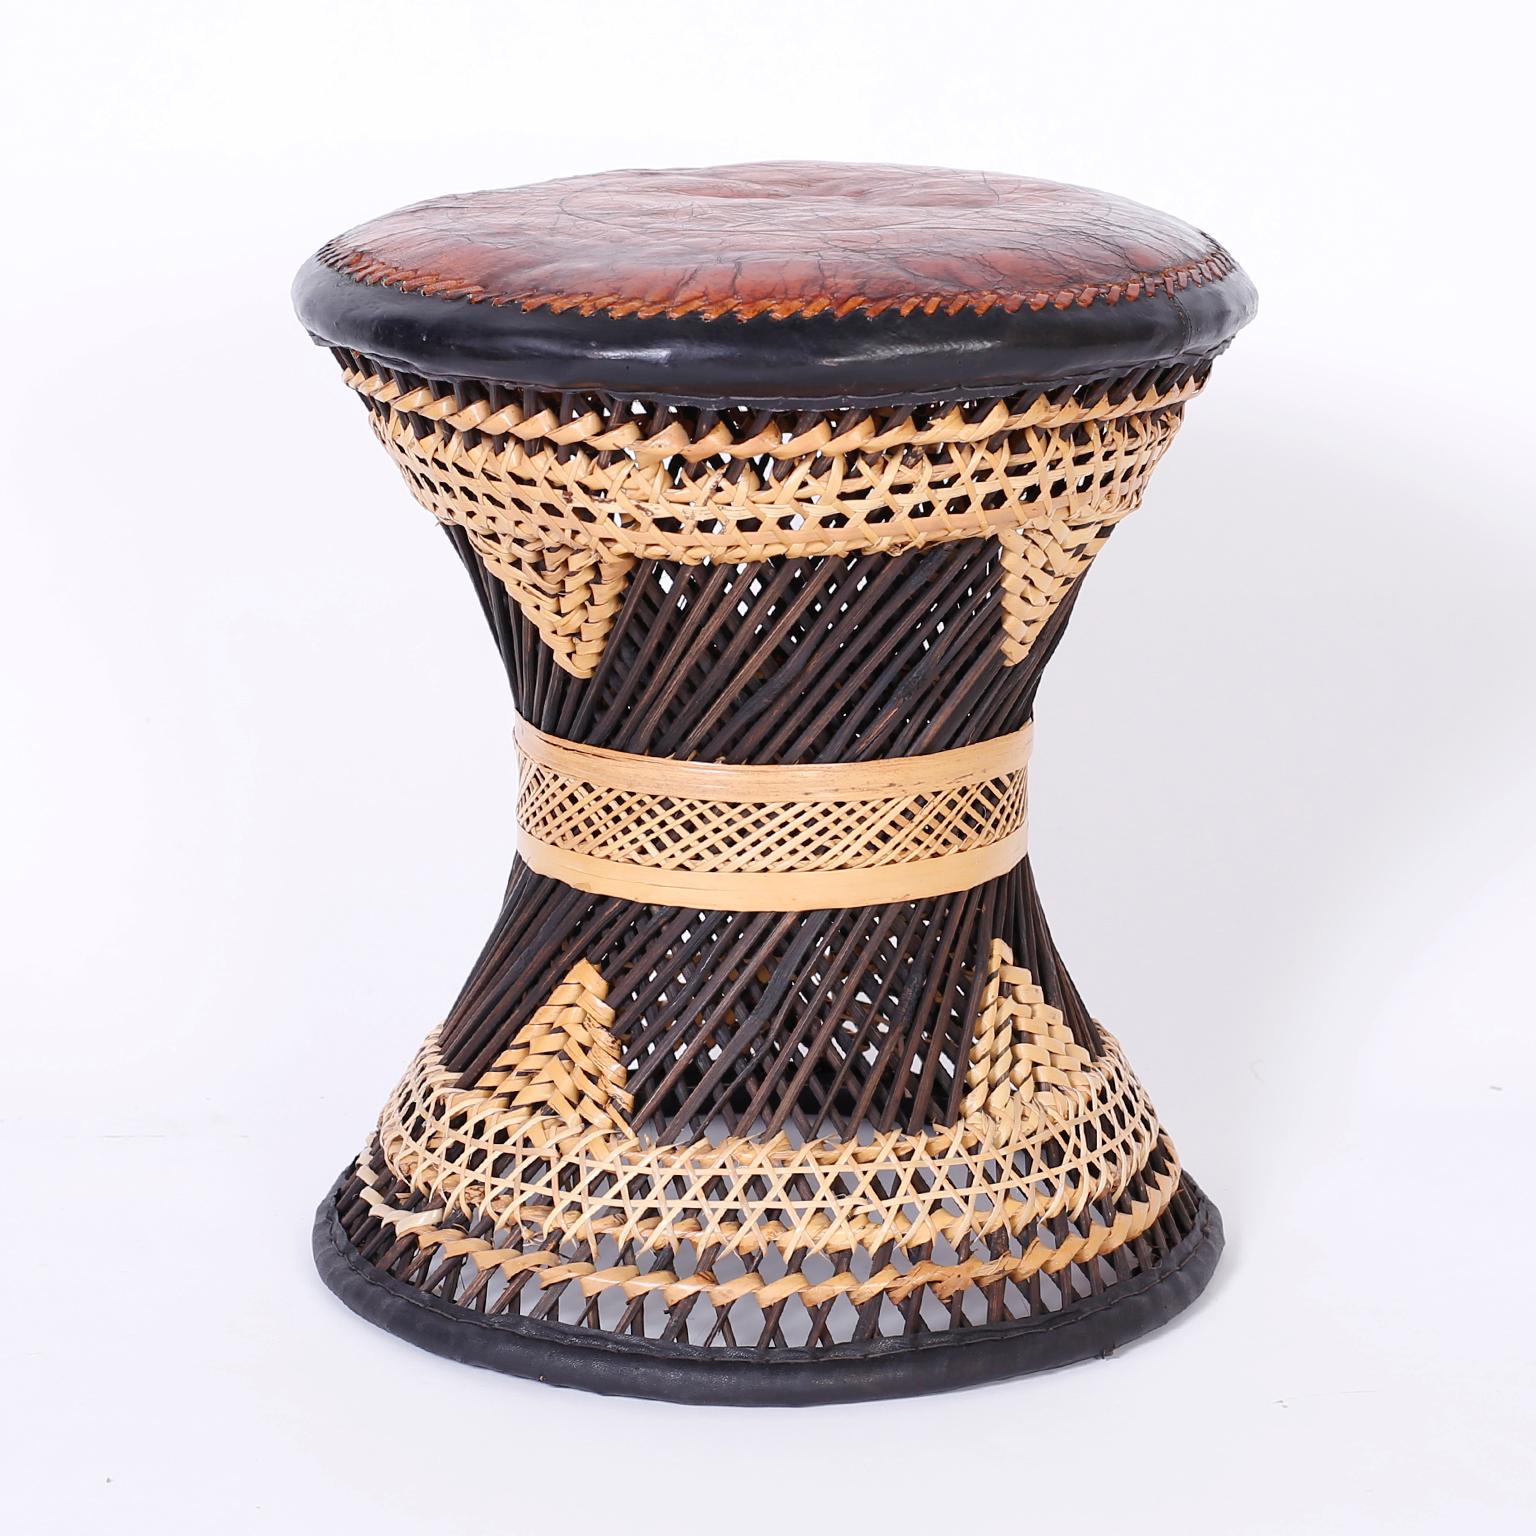 Three Moroccan stools with lush brown leather tops aged to perfection. The bases are crafted in stick wicker and decorated with reed wrapped in geometric designs. Priced Individually.